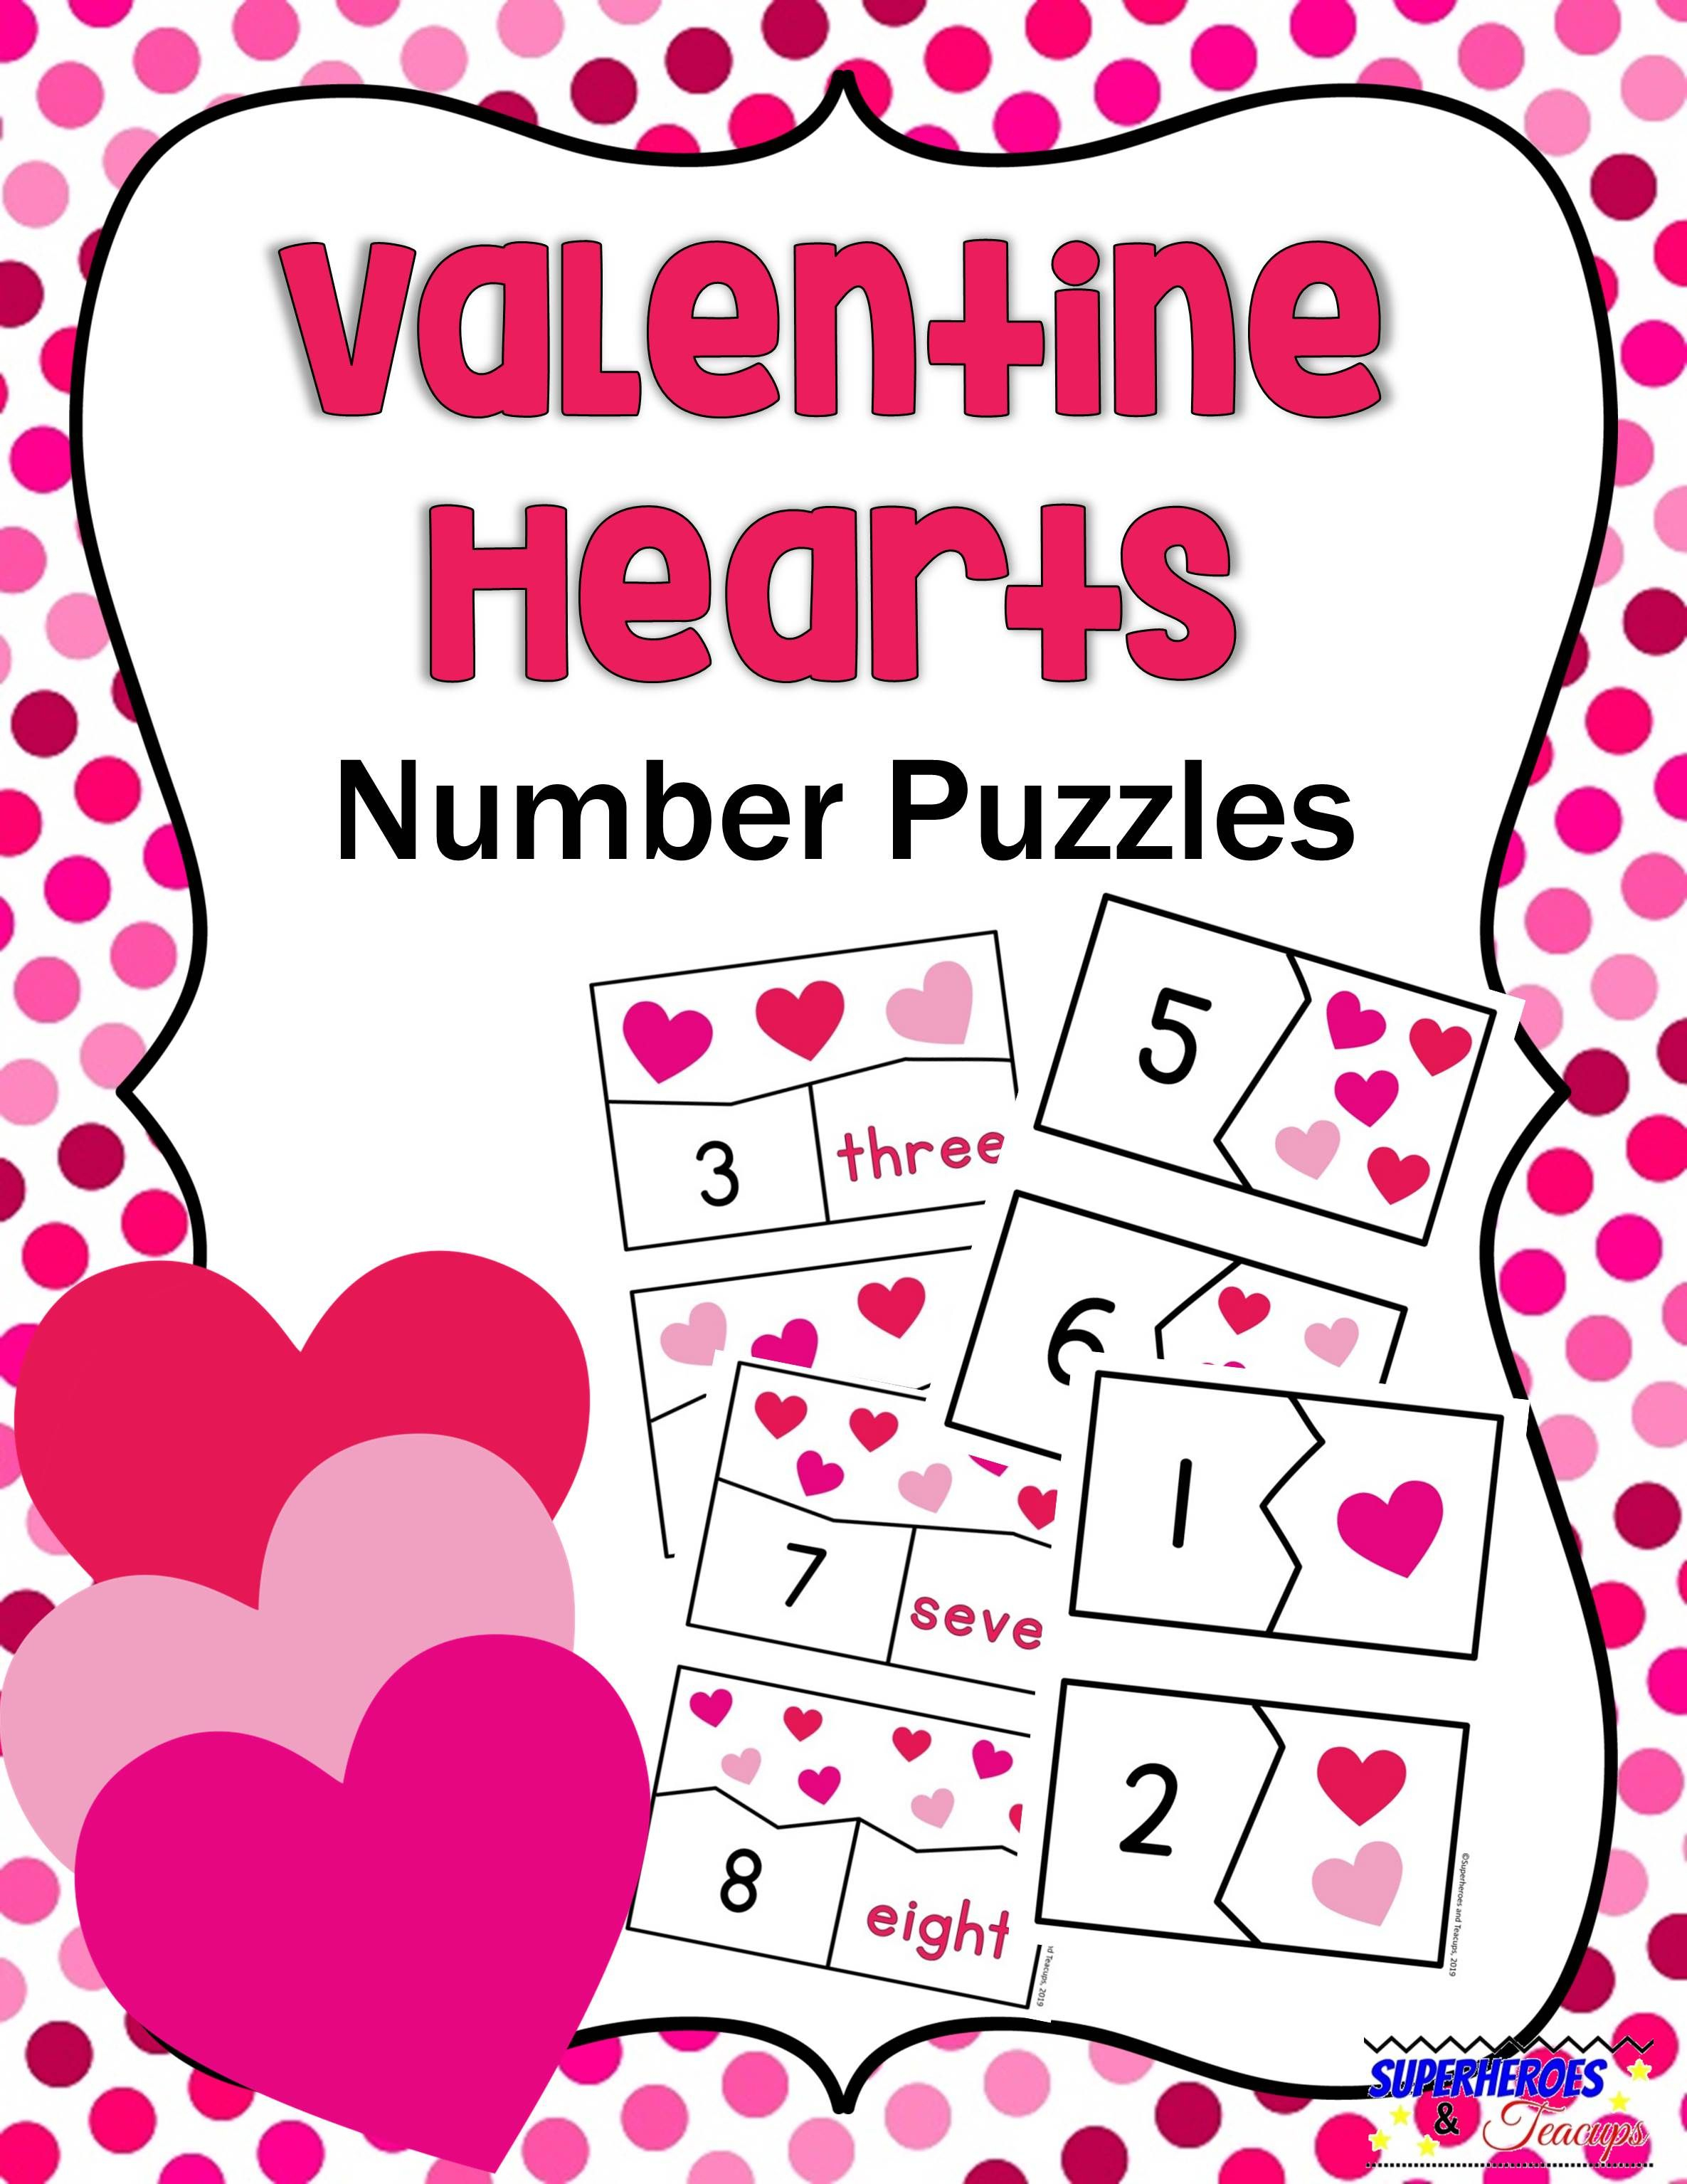 Valentine Hearts Number Puzzles Free Printable | Superheroes And - Printable Heart Puzzles